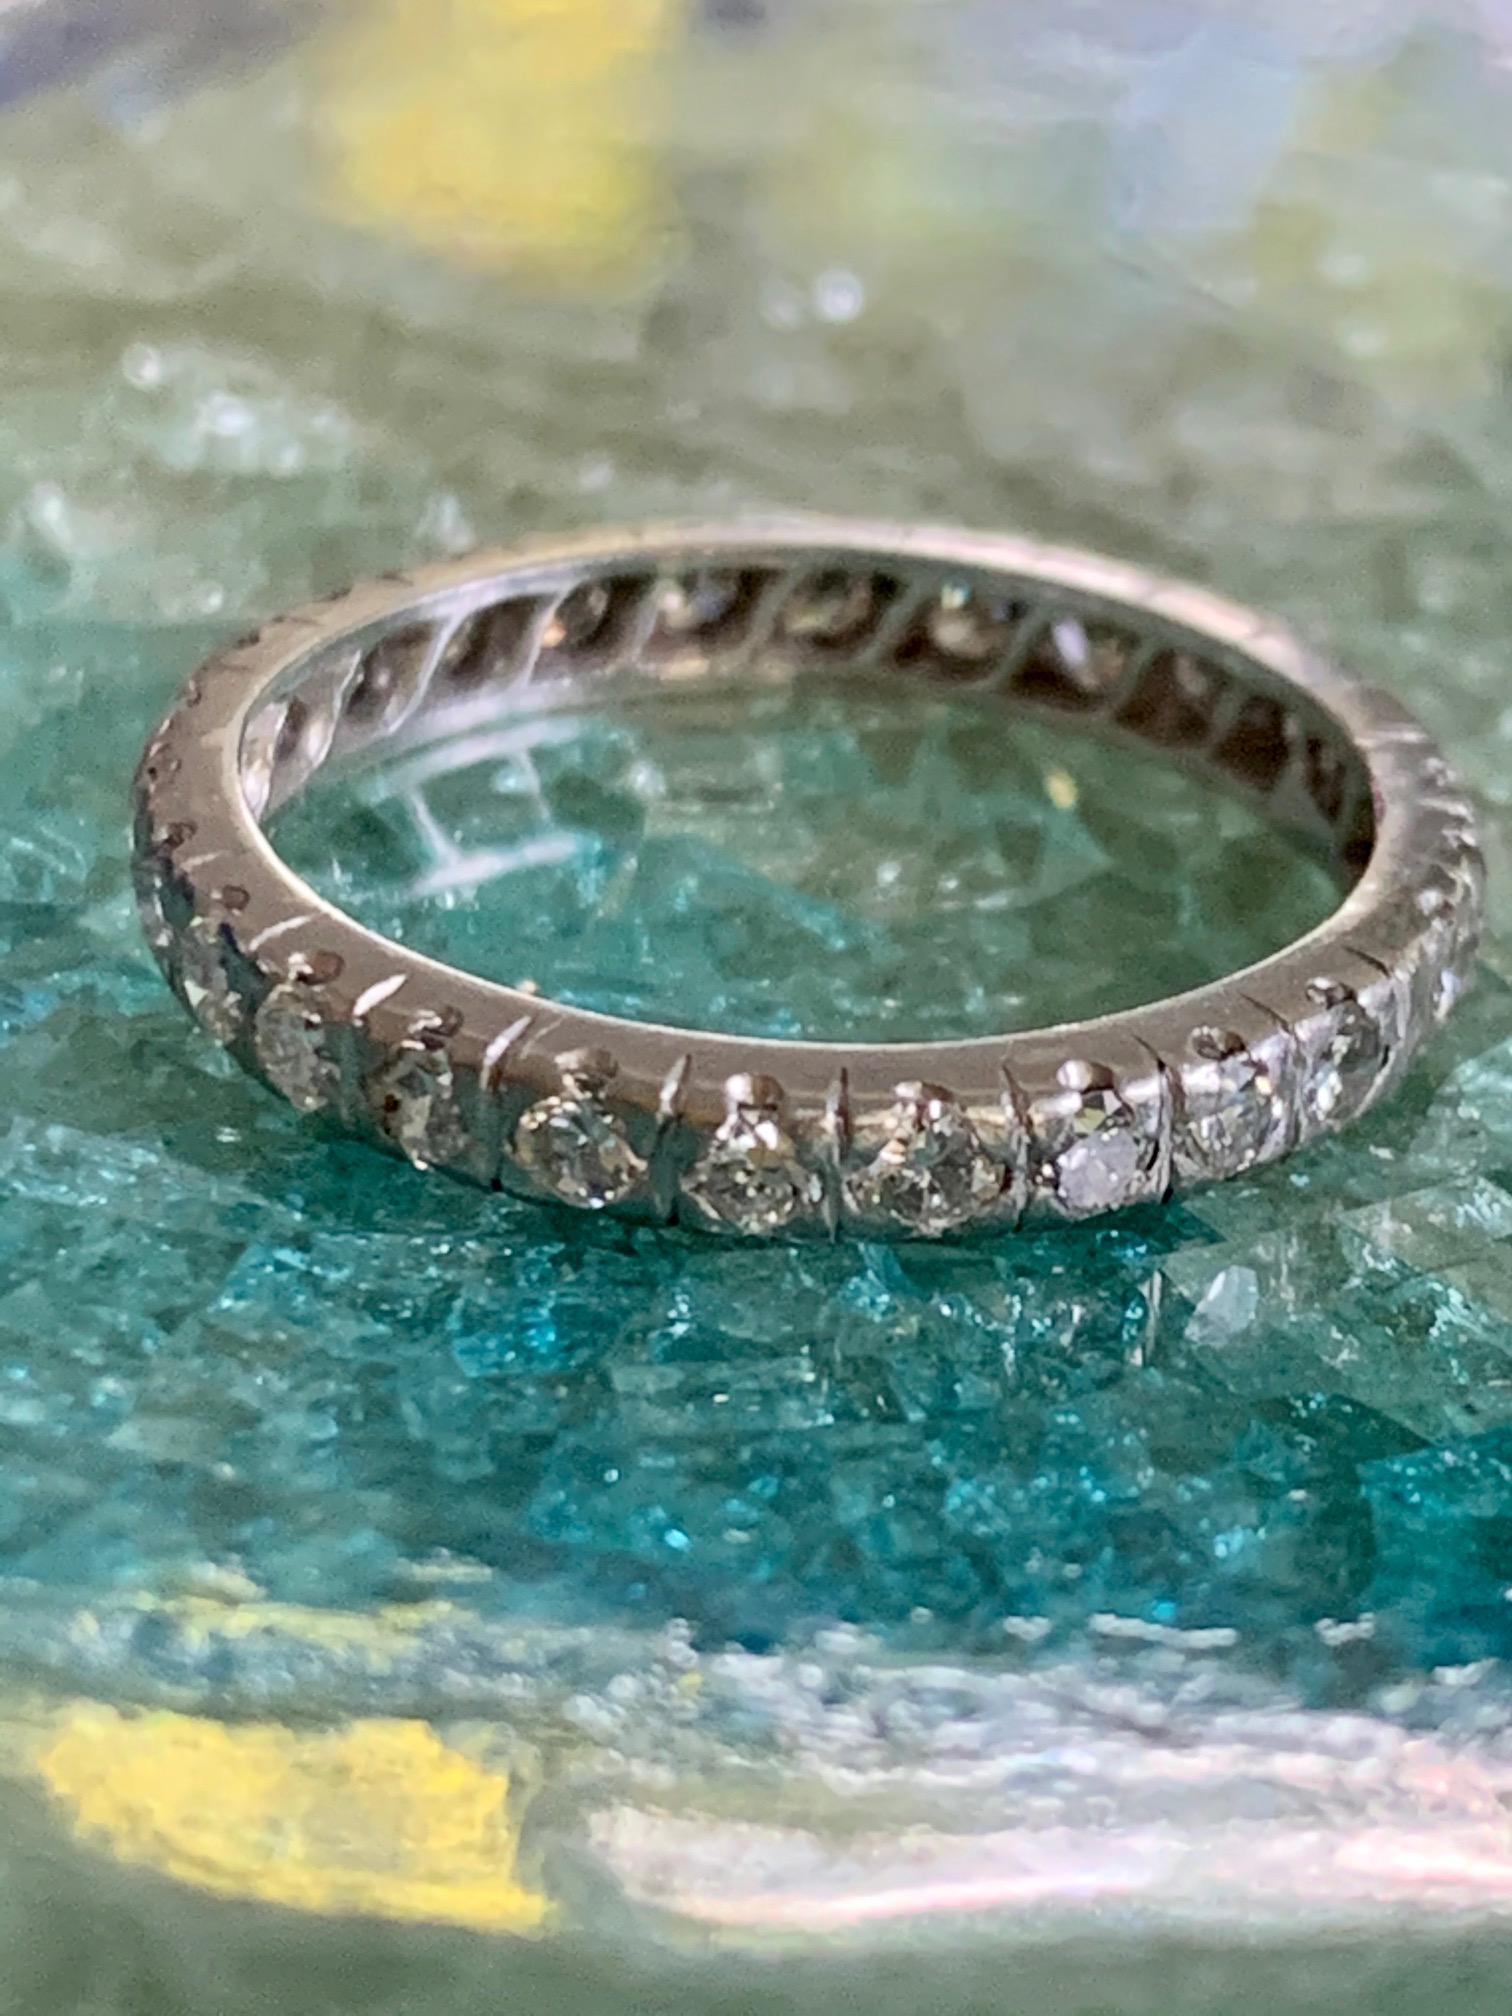 This eternity band features approximately .50ctw of brilliant cut Diamonds set in Platinum, completely encircling the entire band.  

Size:  5 3/4
Weight: 2.5 grams